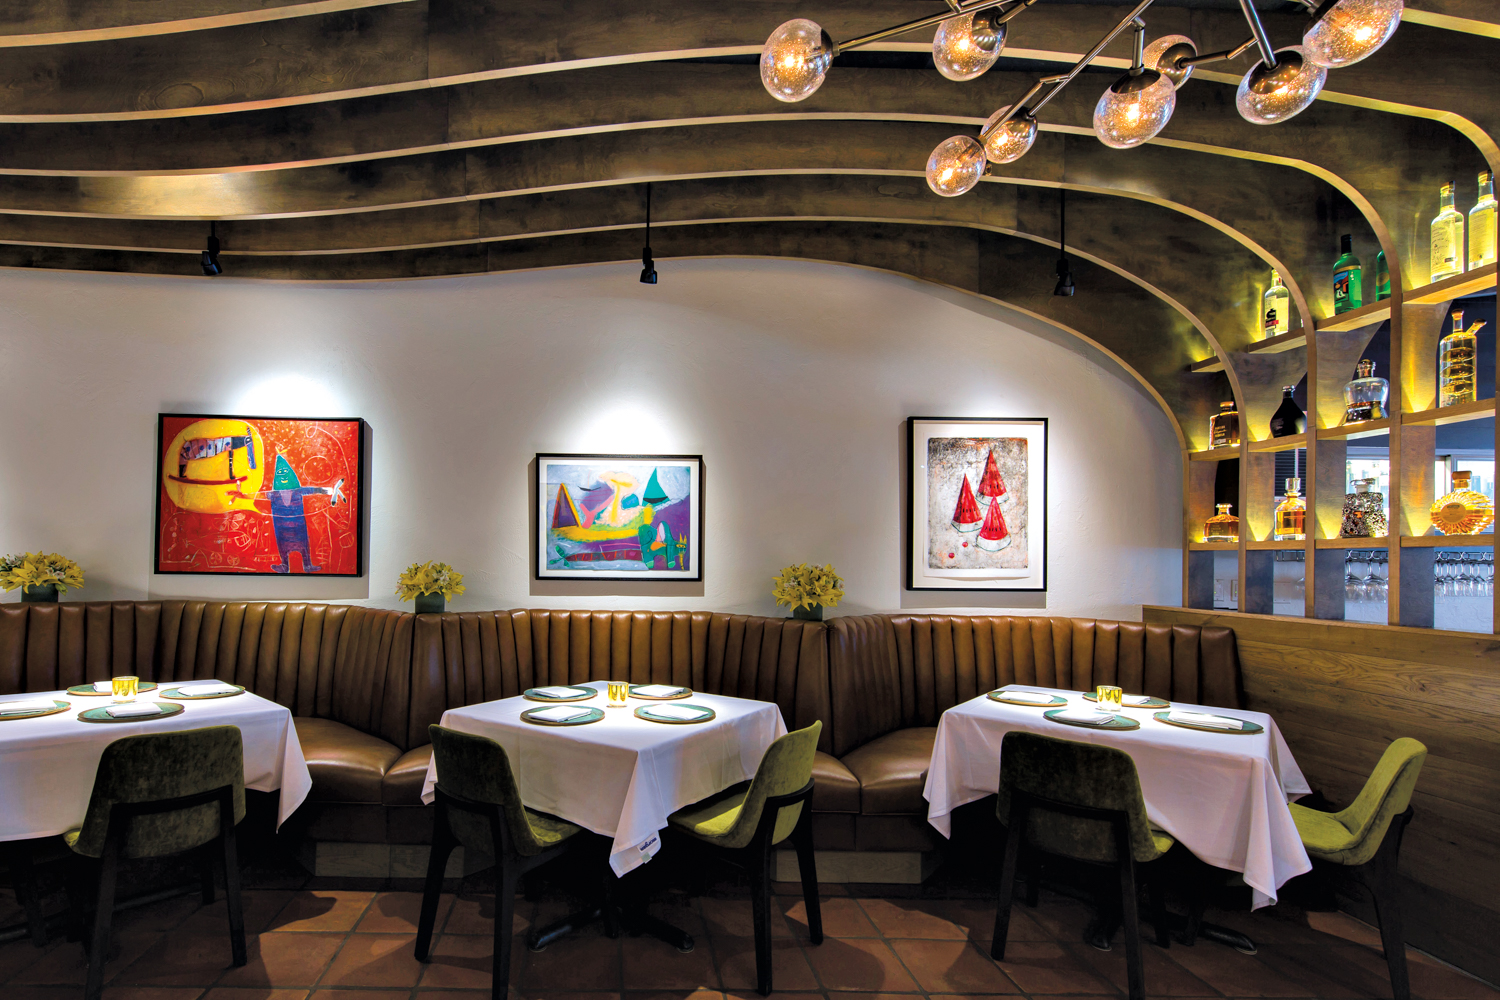 restaurant dining room with tufted leather banquettes beneath colorful artworks